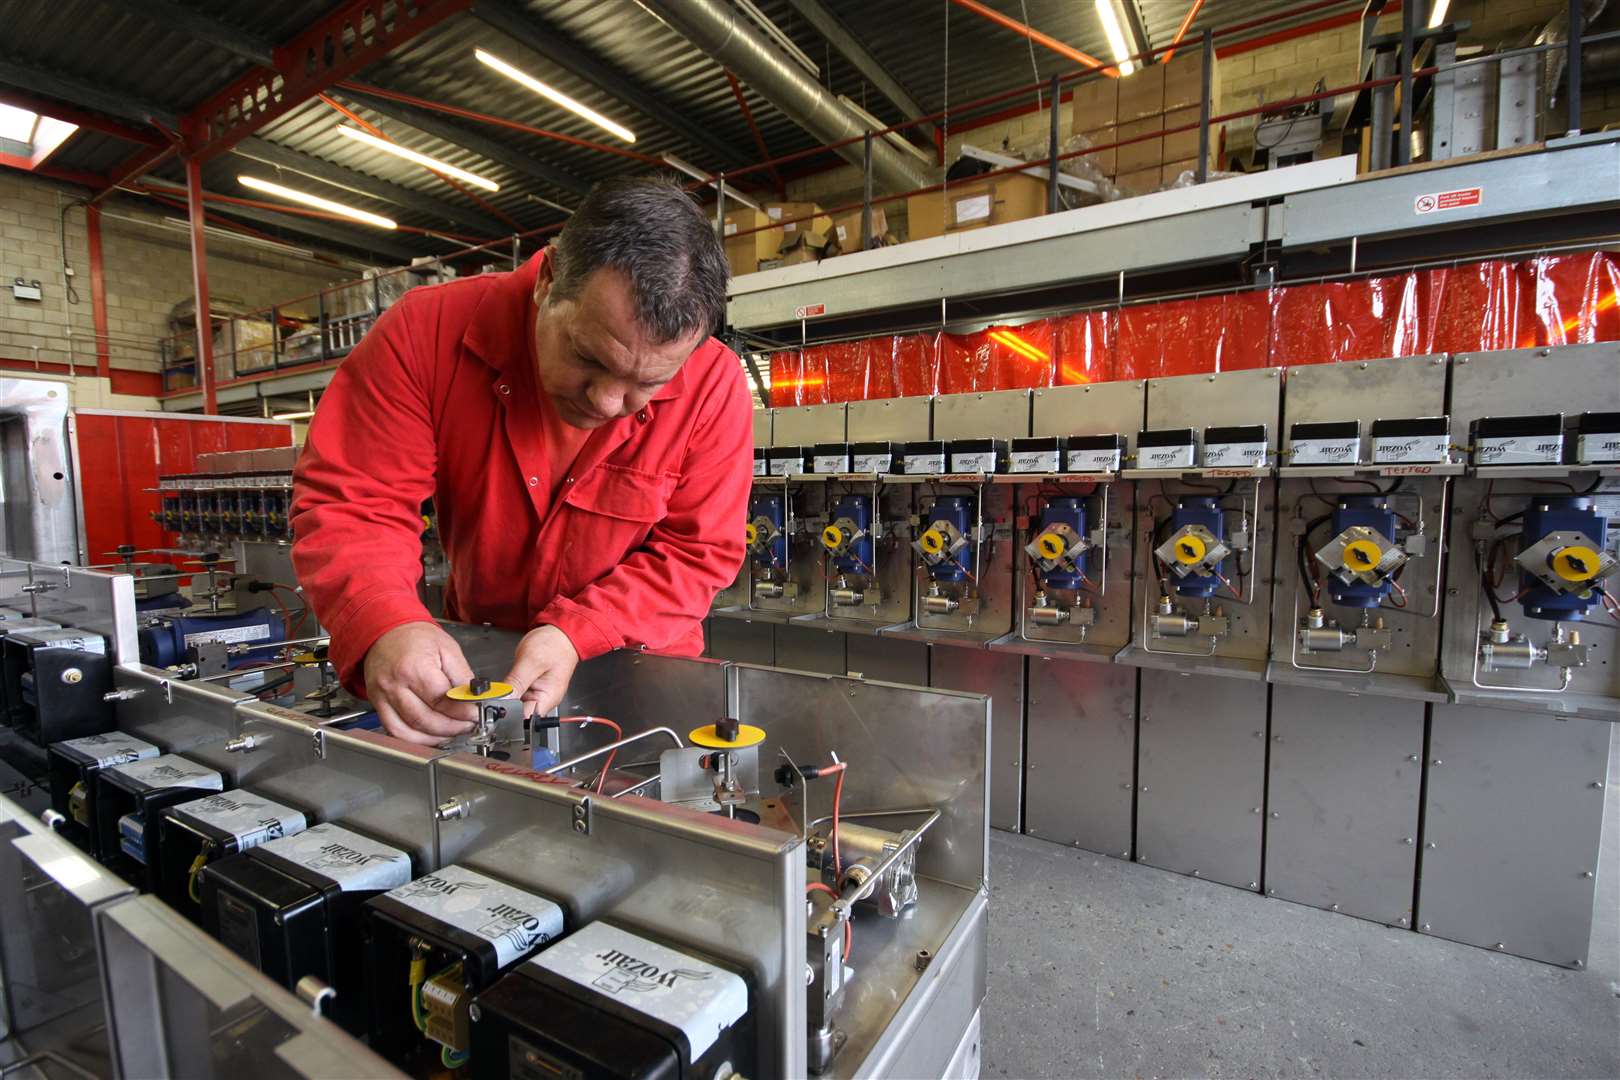 A Wozair employee checks ventilation fire dampers at the Gillingham headquarters